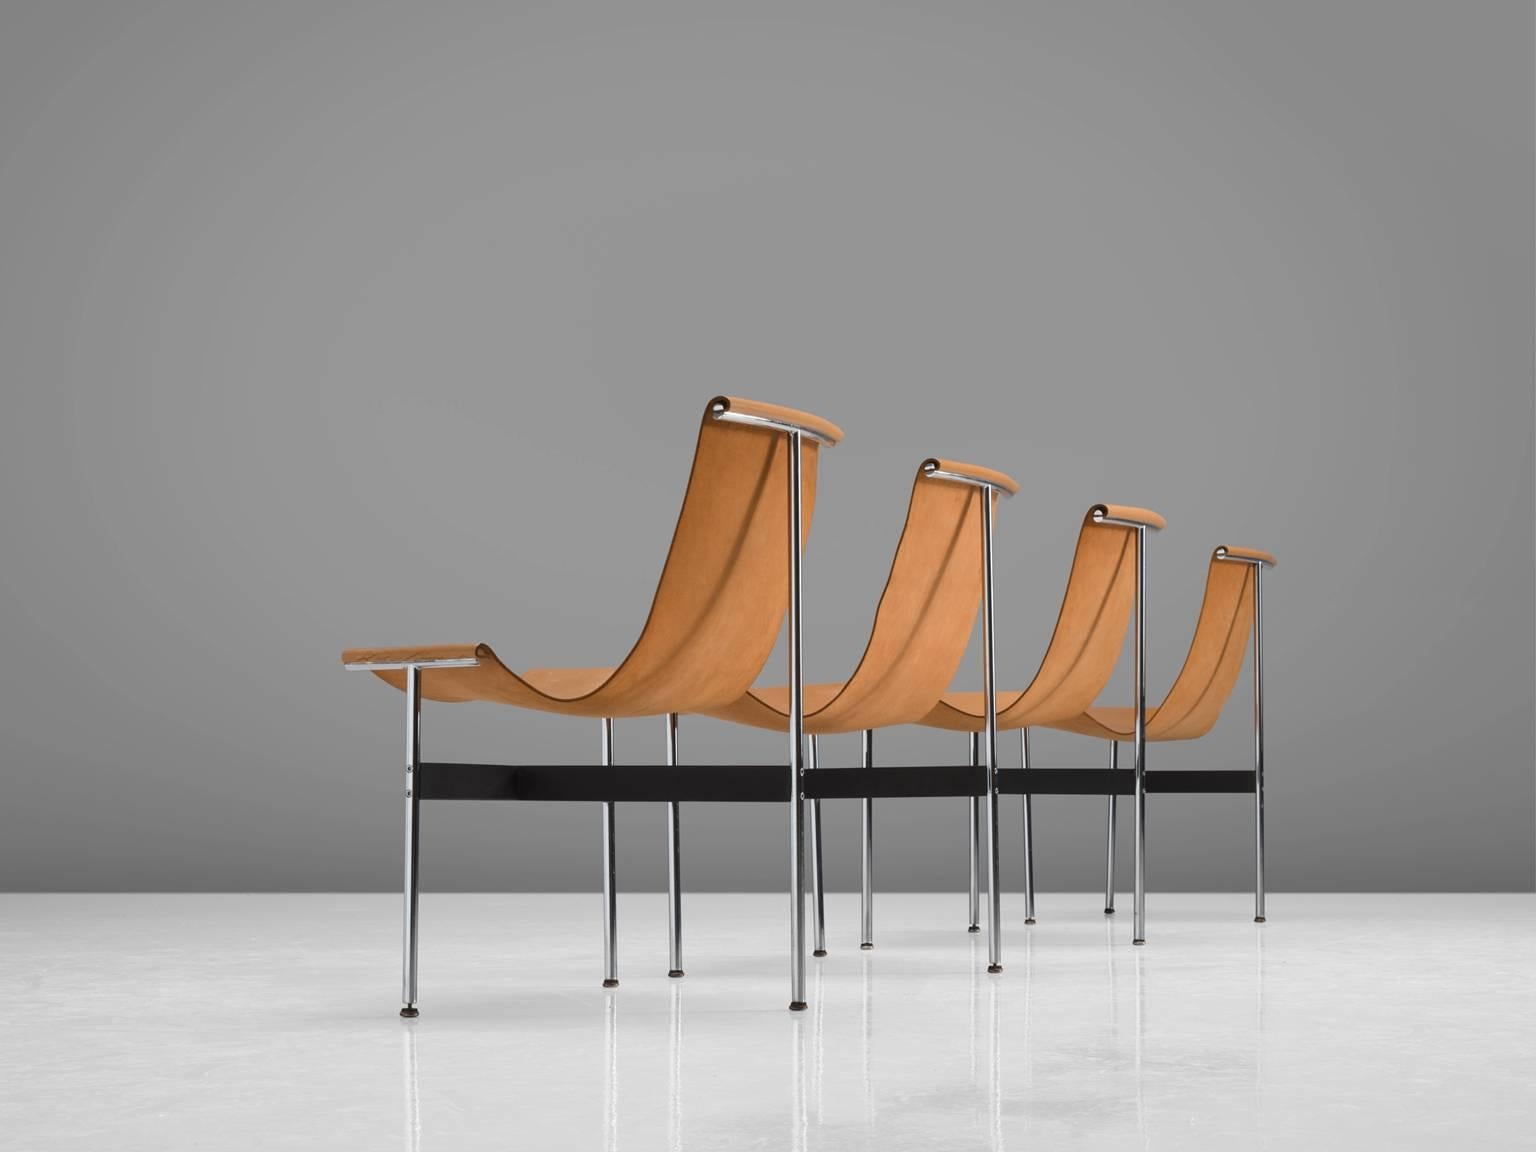 Katavolos, Kelley and Littell, chair, chrome-plated steel, enameled steel and cognac leather, United States, 1952.

This set of elegant and playful three-legged chairs seems almost too delicate to sit in. But in fact these sensuous chairs are very